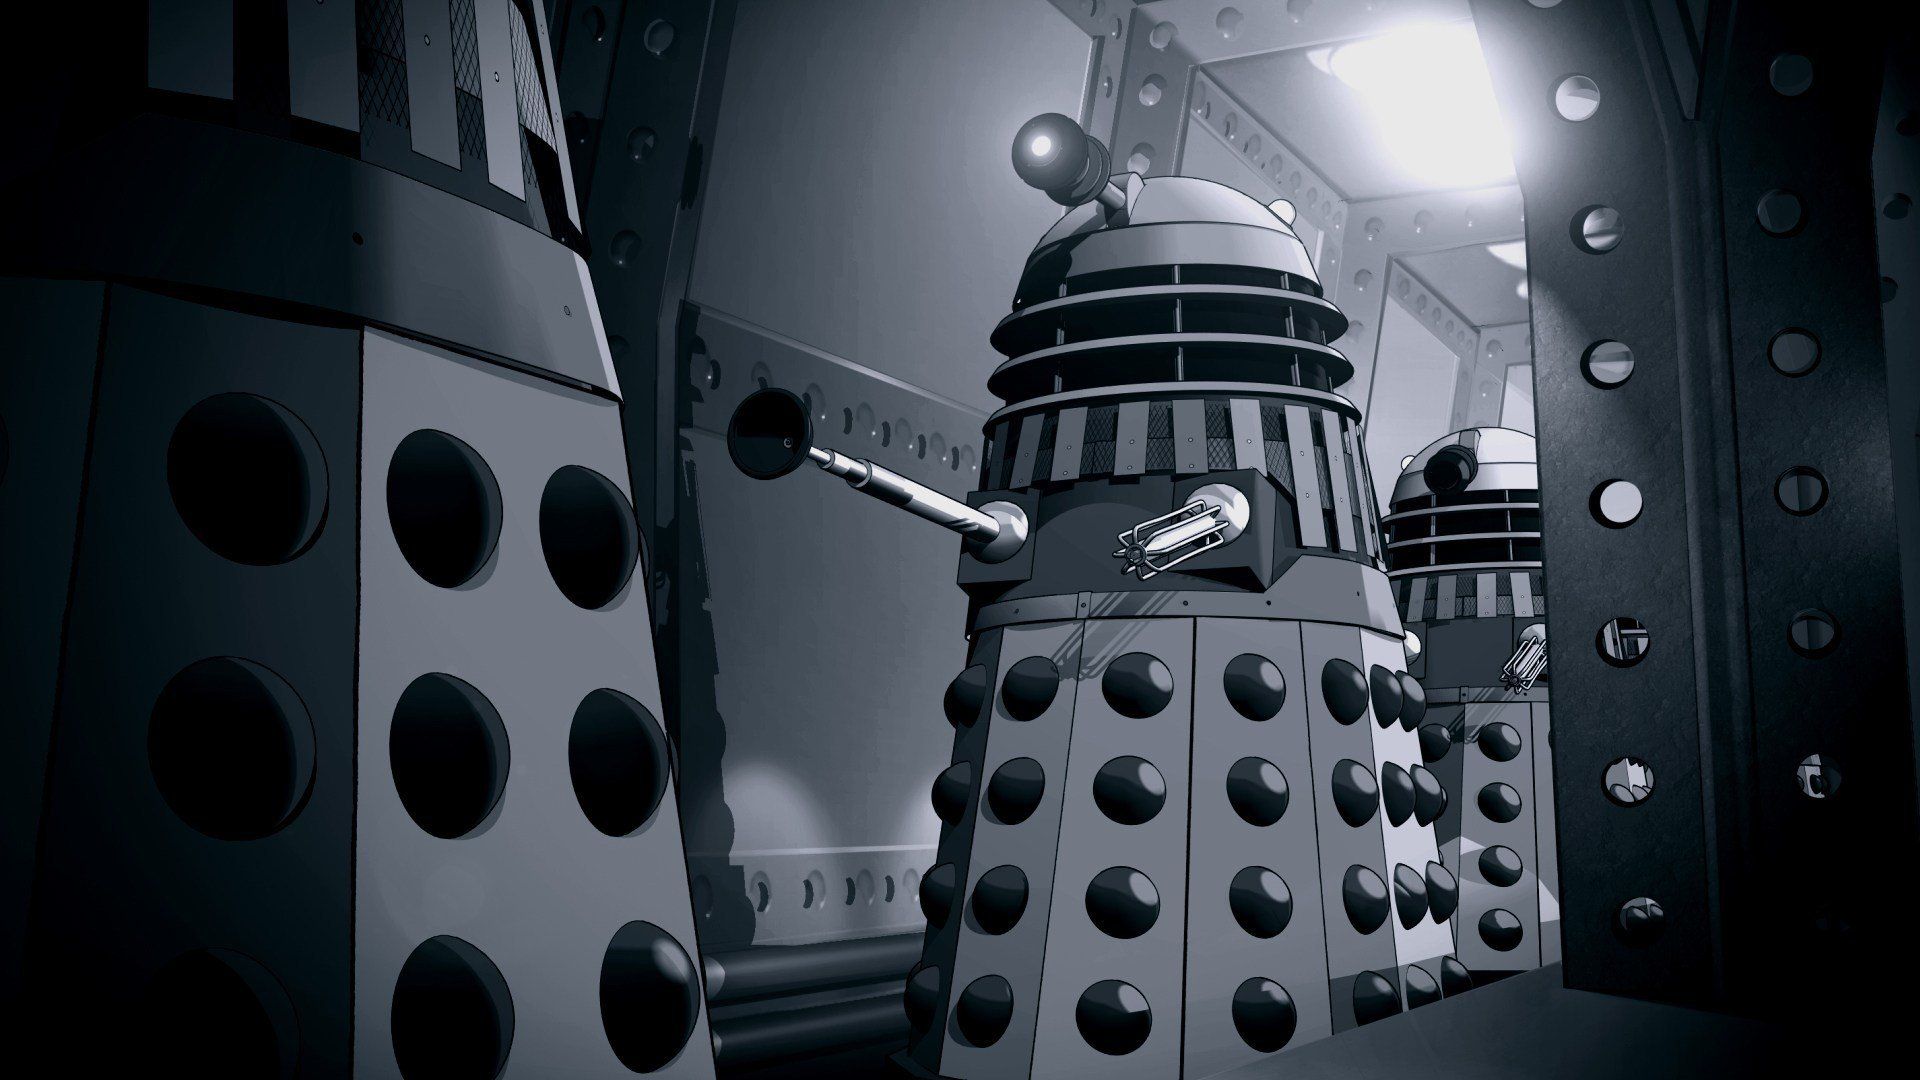 Doctor Who: The Power of the Daleks Backdrop